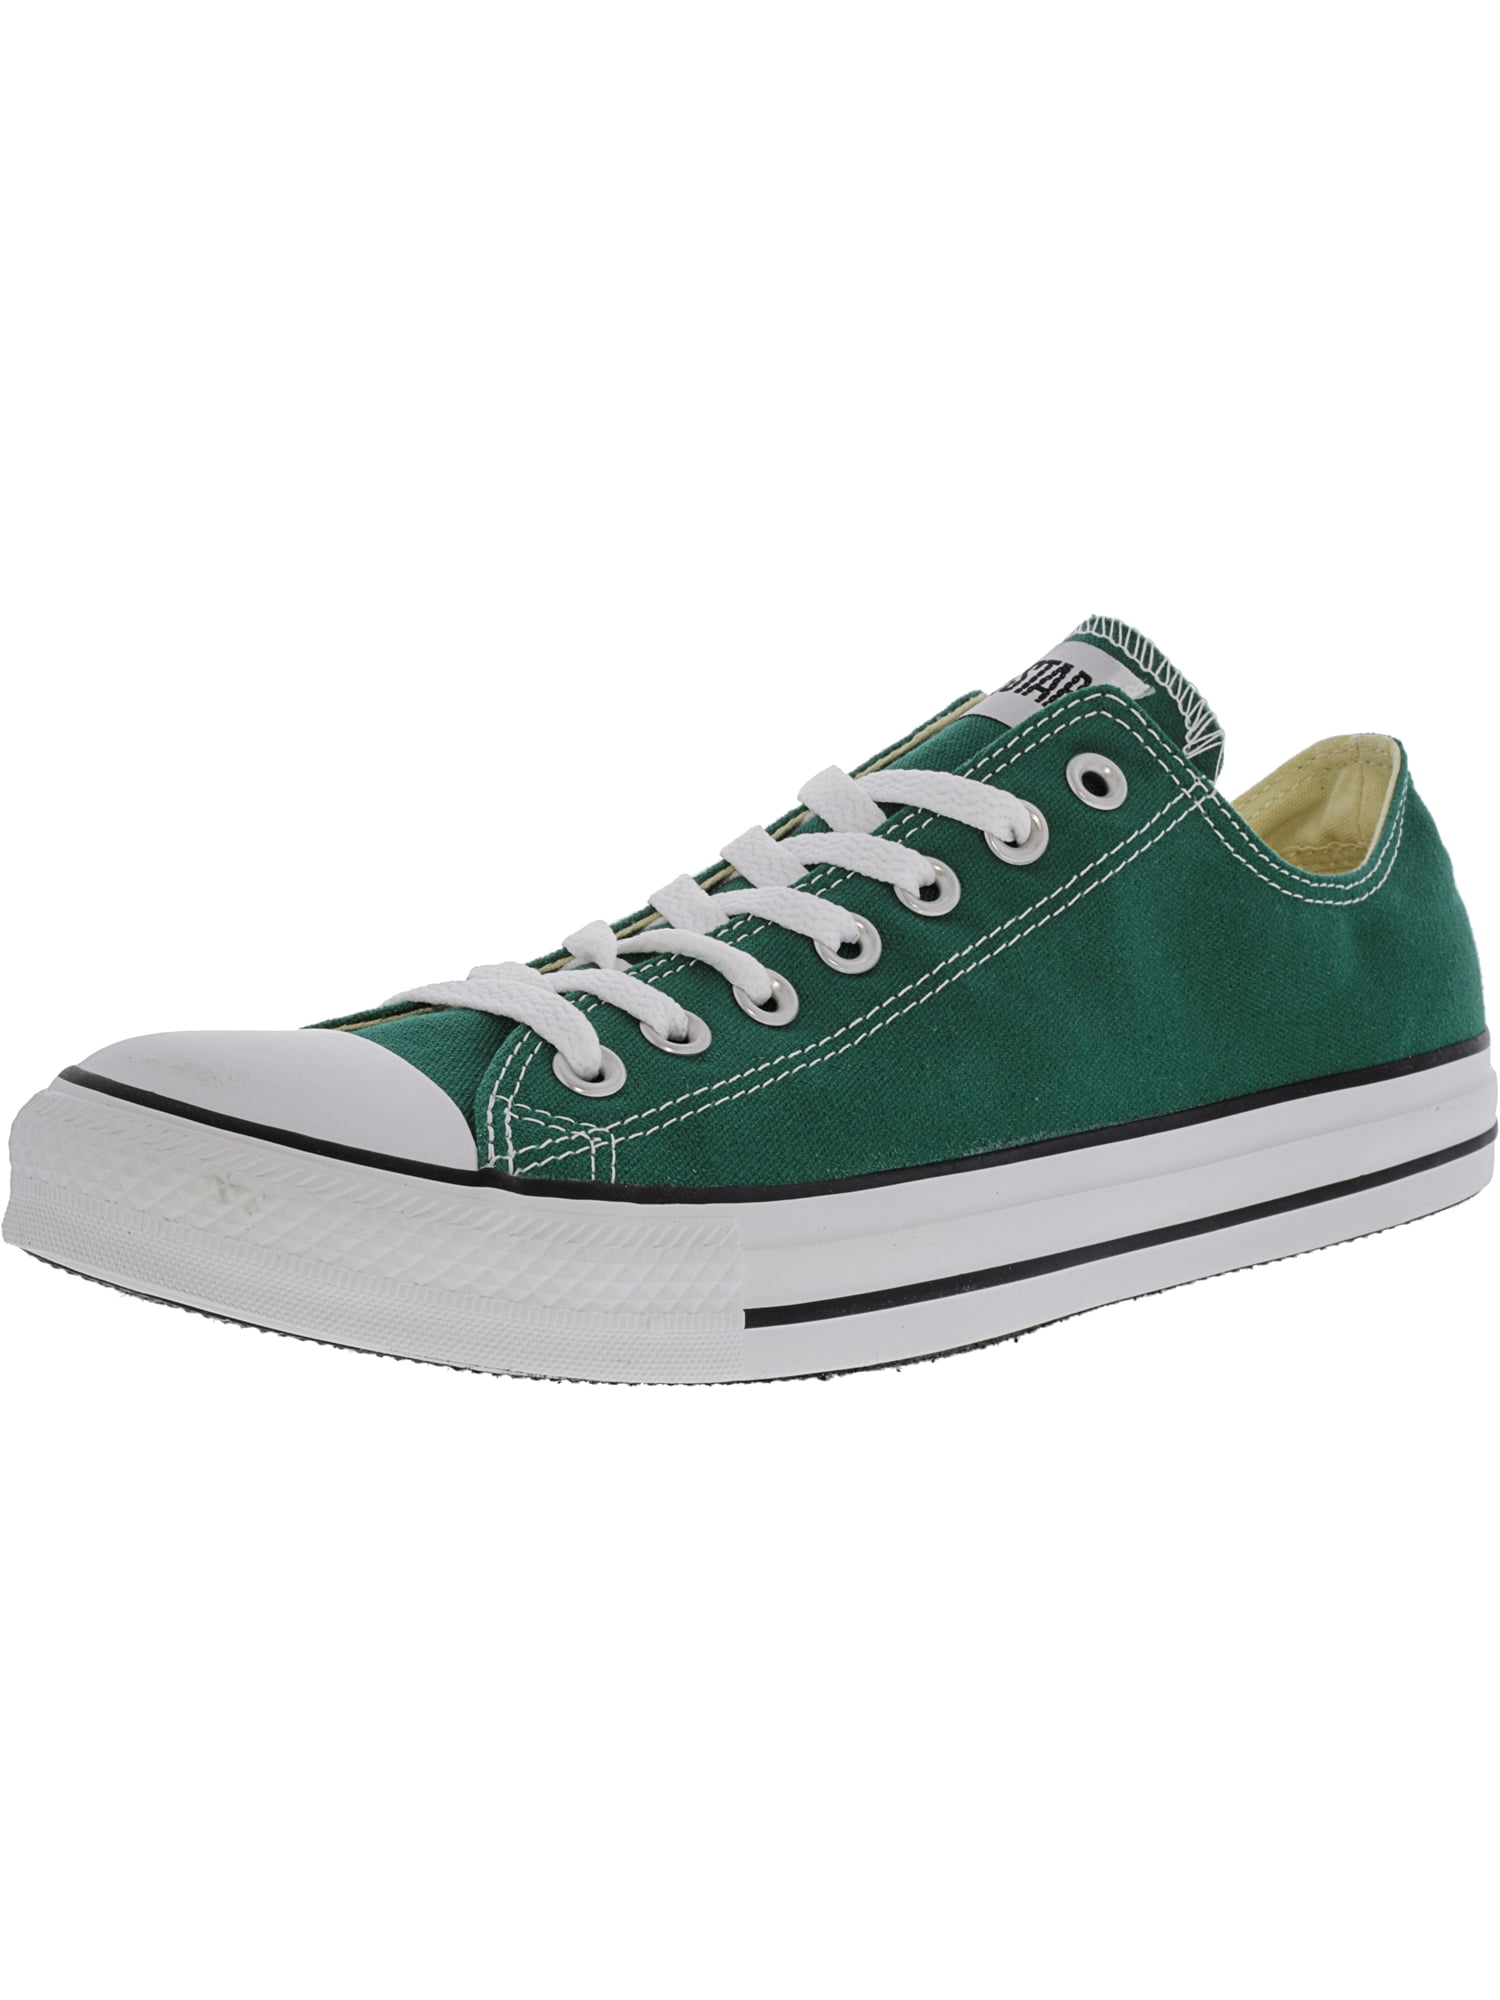 Converse - Converse Chuck Taylor All Star Ox Forest Green Ankle-High ...